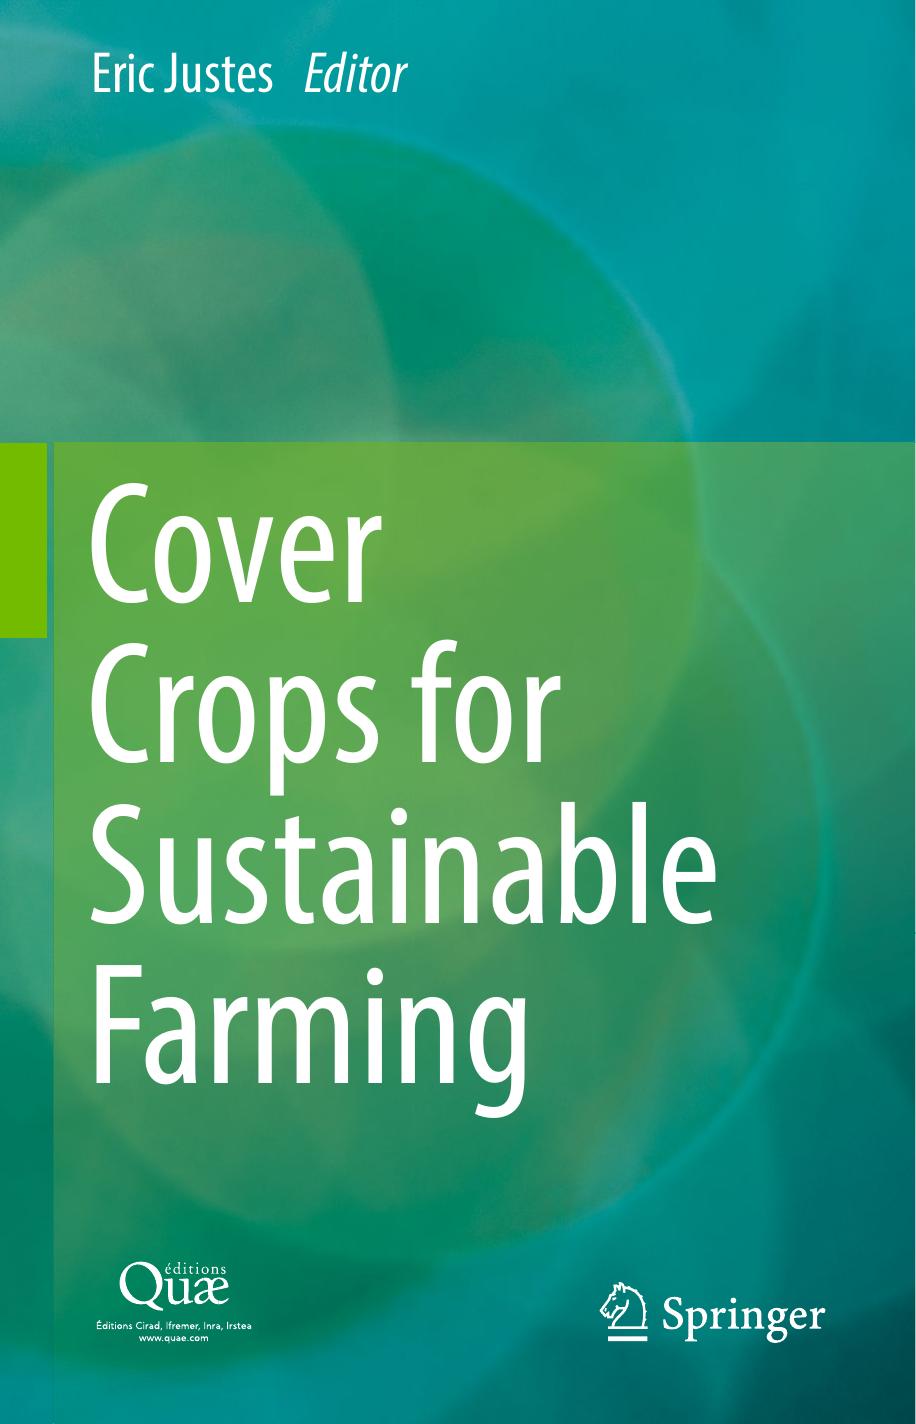 Cover Crops for Sustainable Farming 2017